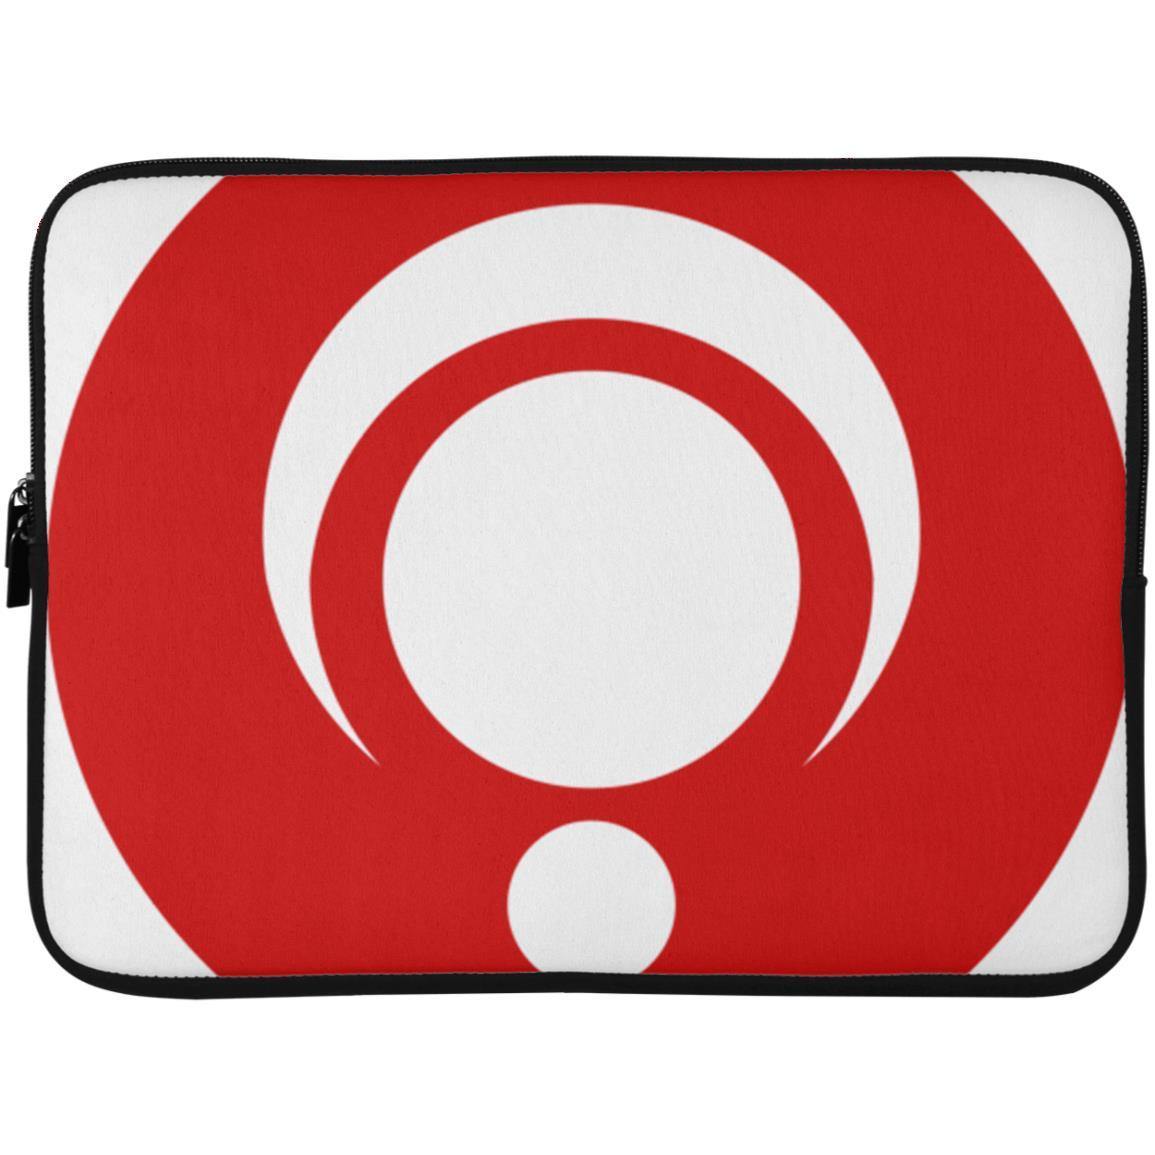 Crop Circle Laptop Sleeve - Cley Hill 3 - Shapes of Wisdom